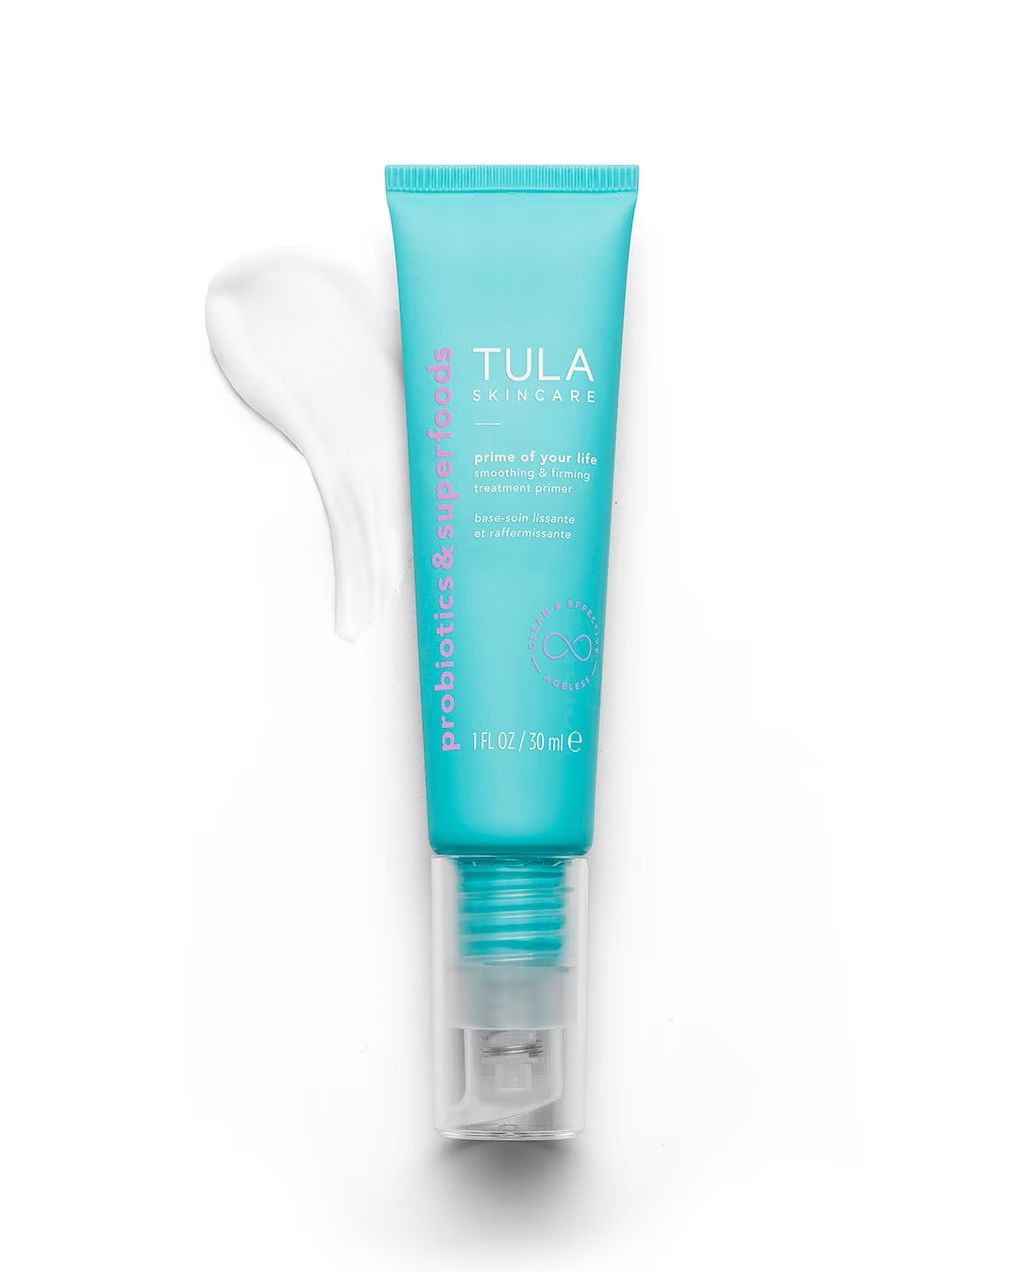 smoothing & firming treatment primer | Tula Skincare